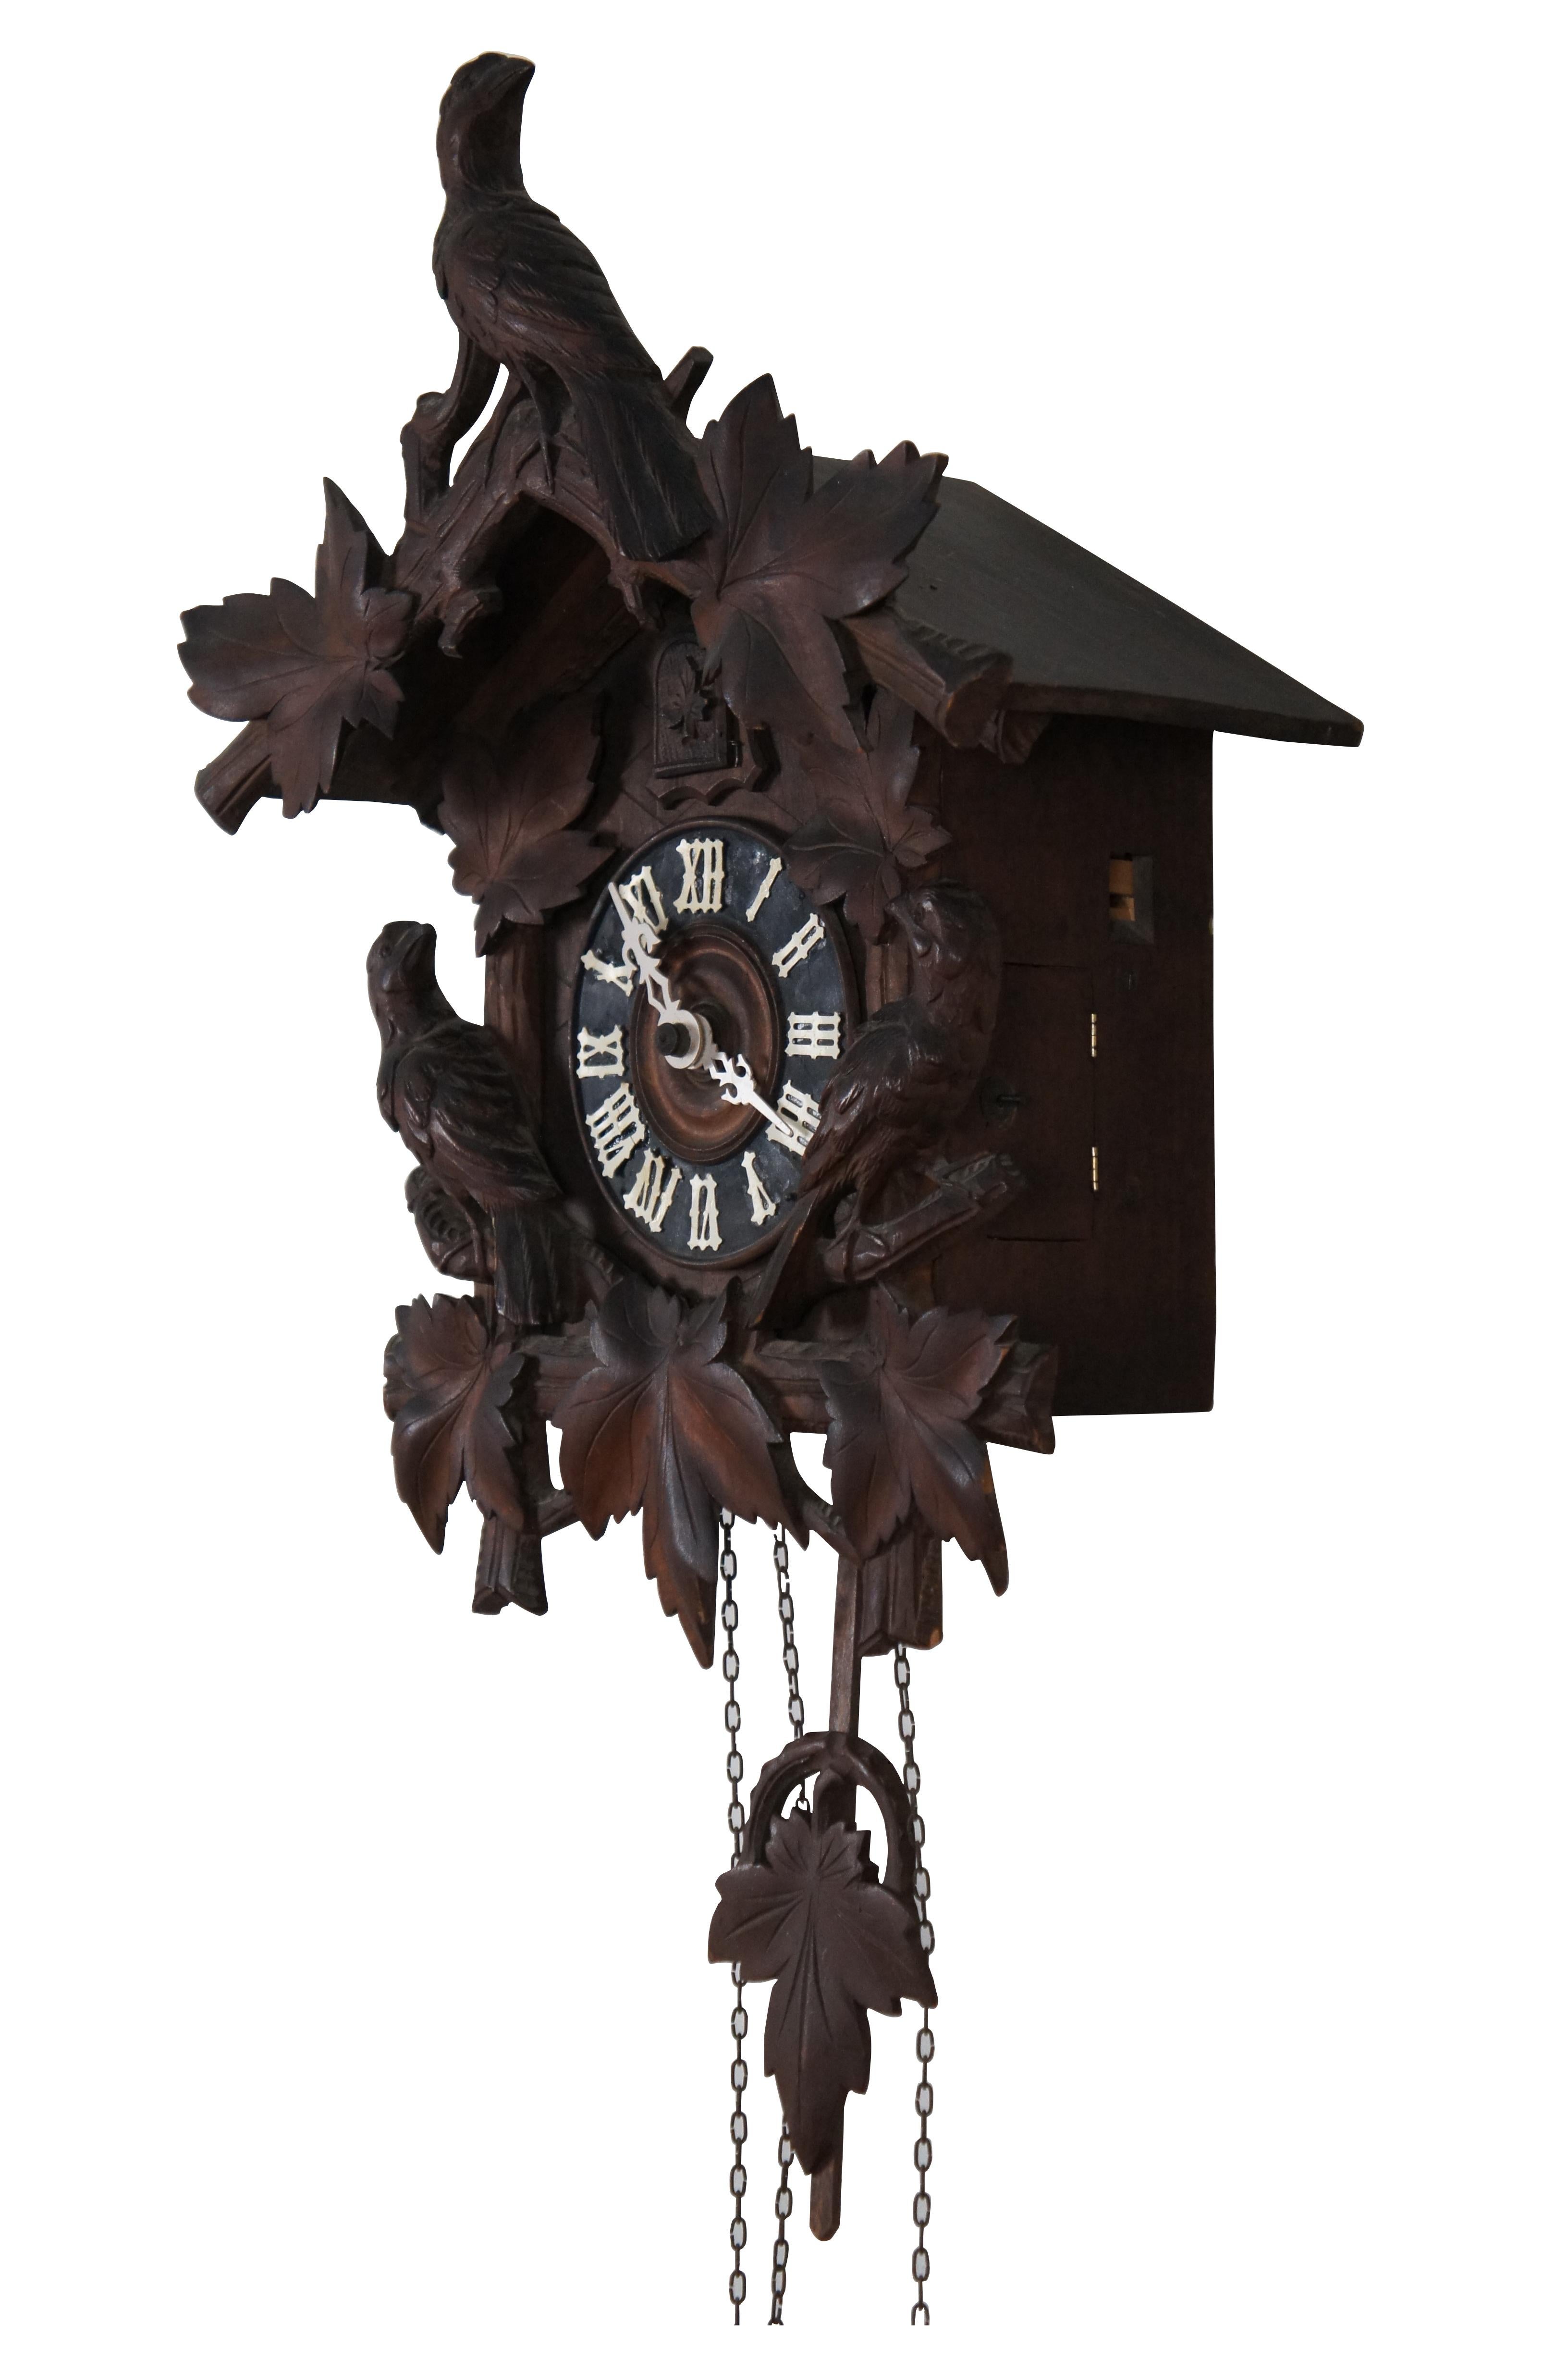 George Kuehl & Co. antique Black Forest carved wood cuckoo clock in the traditional house form, decorated with leaves and birds.  Includes pine cone shaped weights and additional pendulum. works marked G.K.  George Kuehl & Co., operated out of